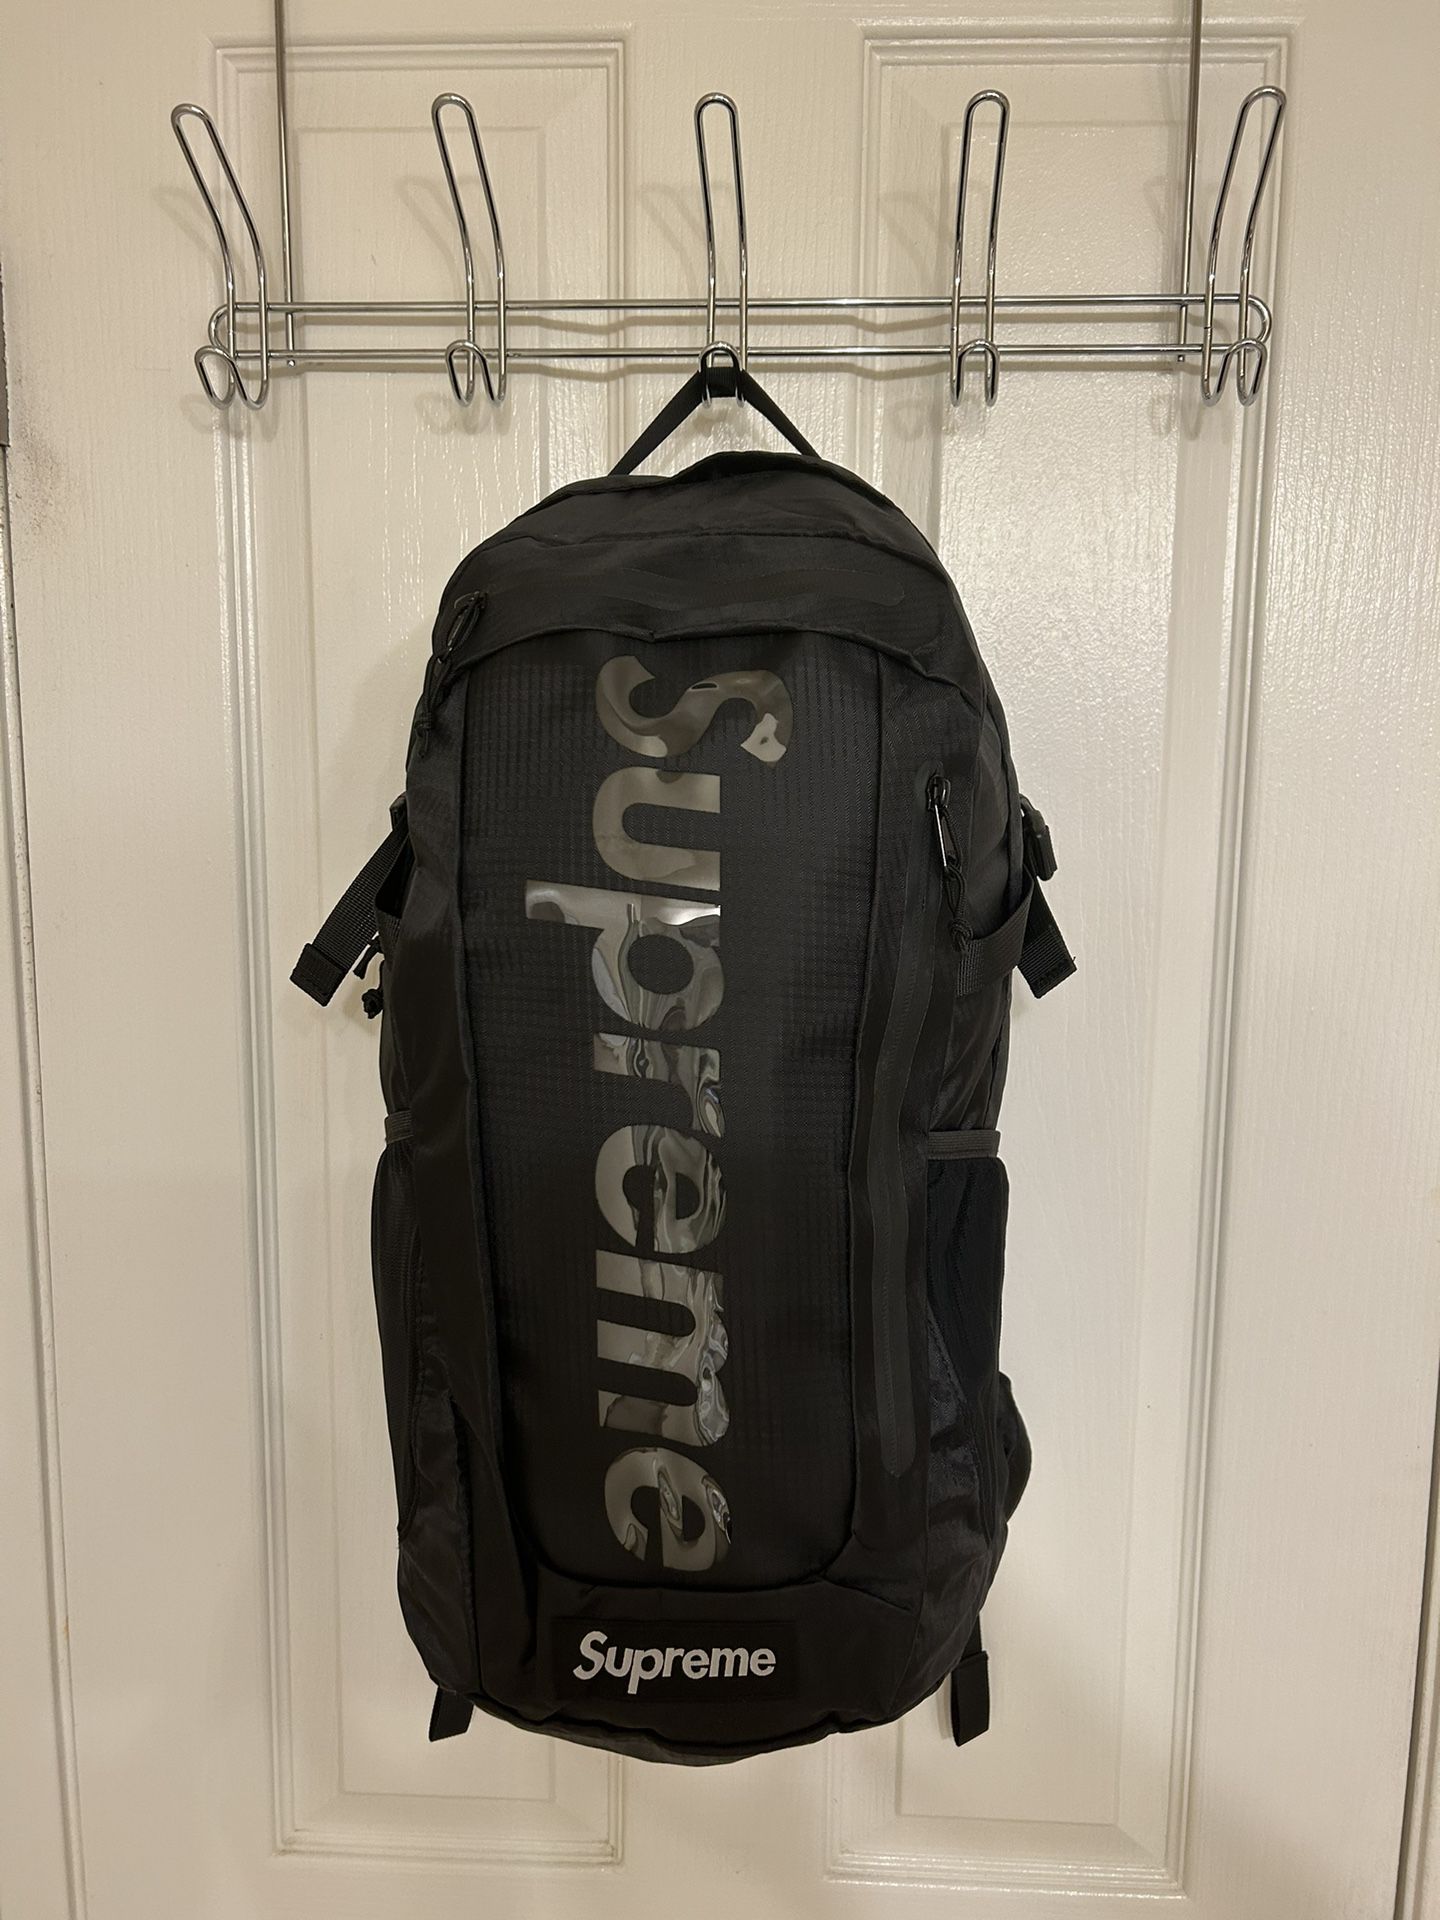 ss17 Supreme Backpack for Sale in Redmond, WA - OfferUp